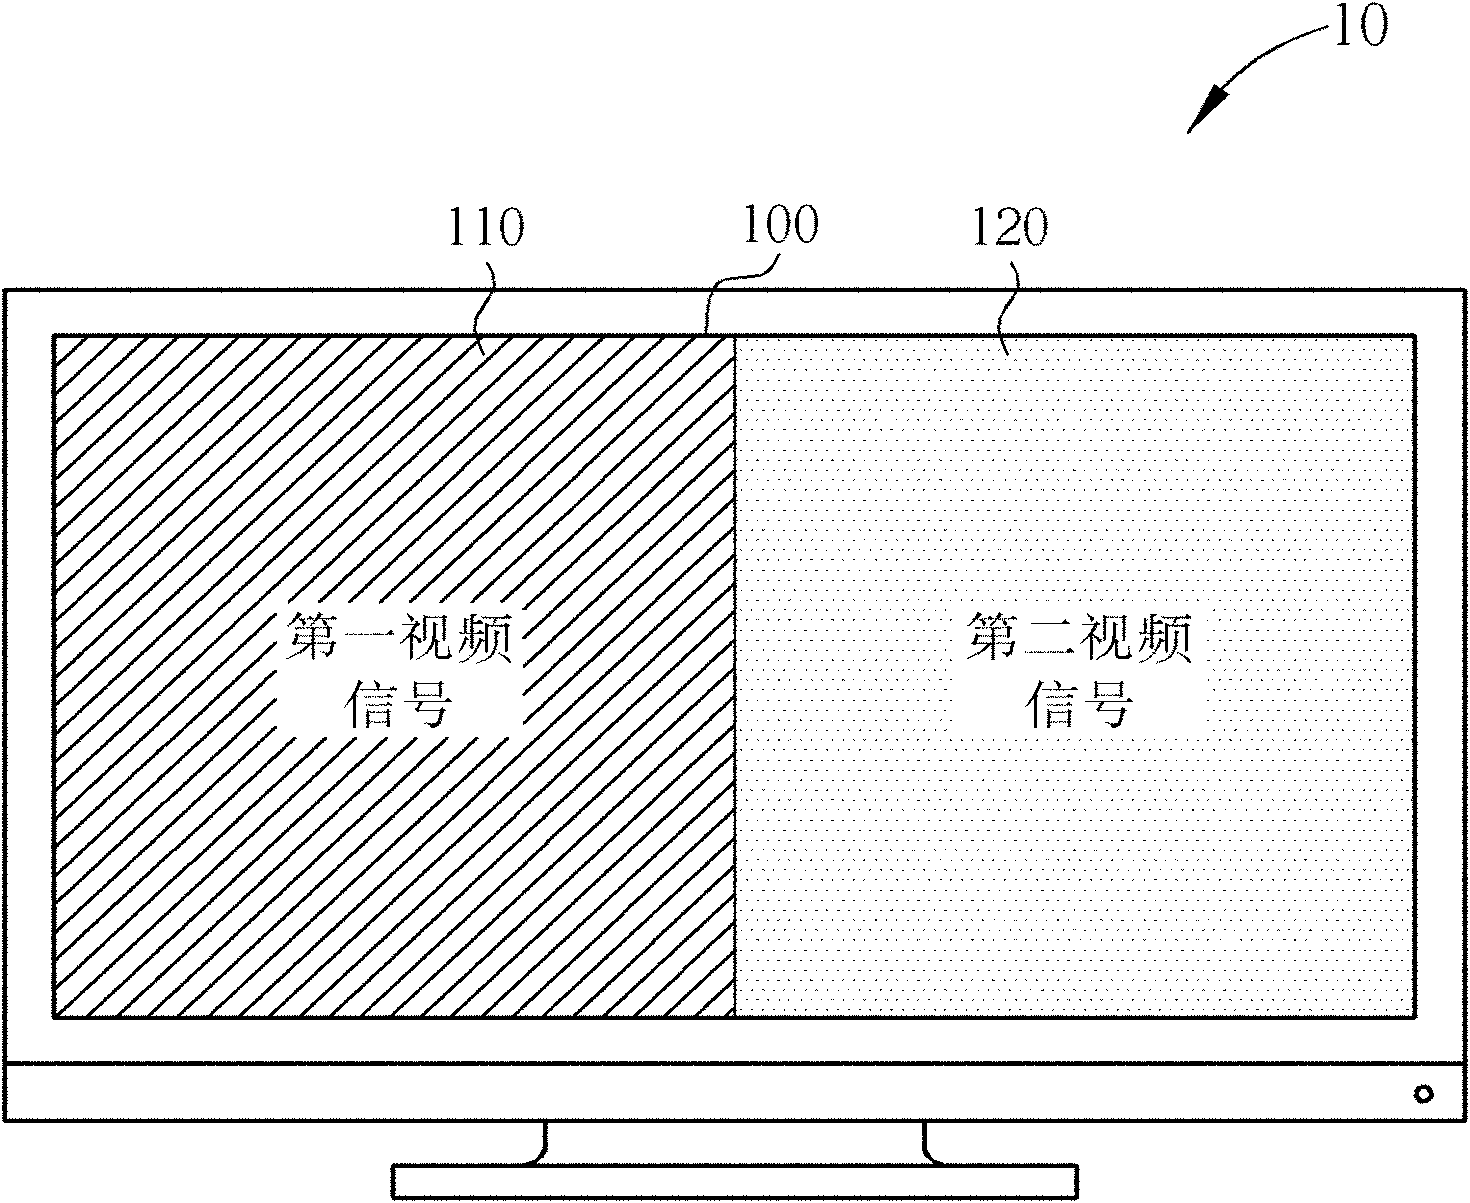 Display system and method for displaying multiple full-screen video signals on display screen